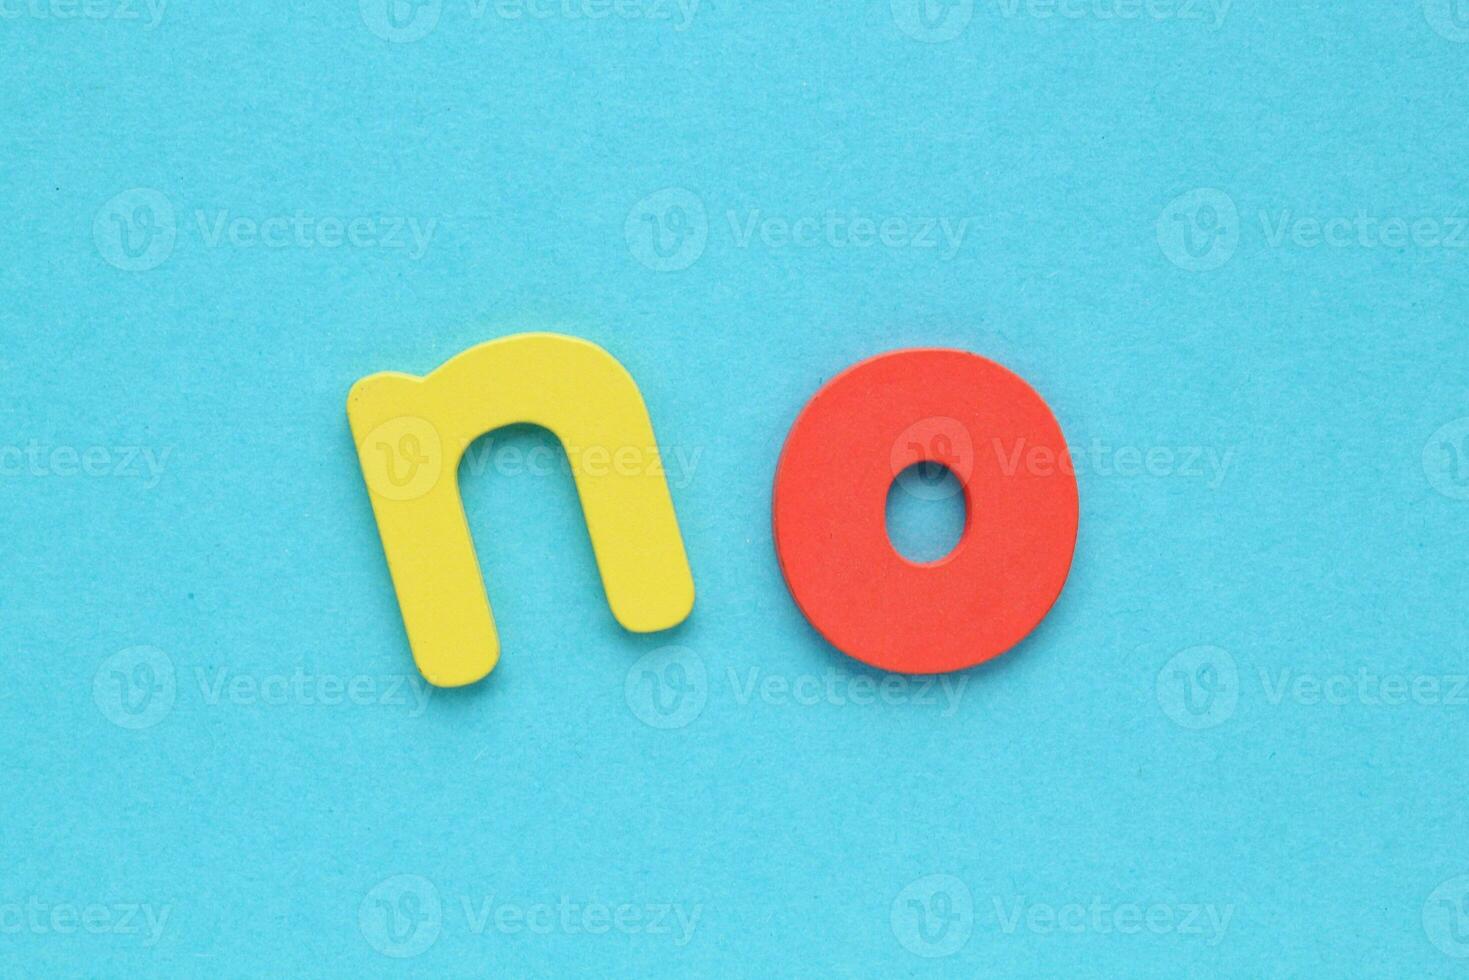 Colorful letters with word No on blue background. Negative answer concept. Decision, disagreement, rejection, refusal or contradiction photo